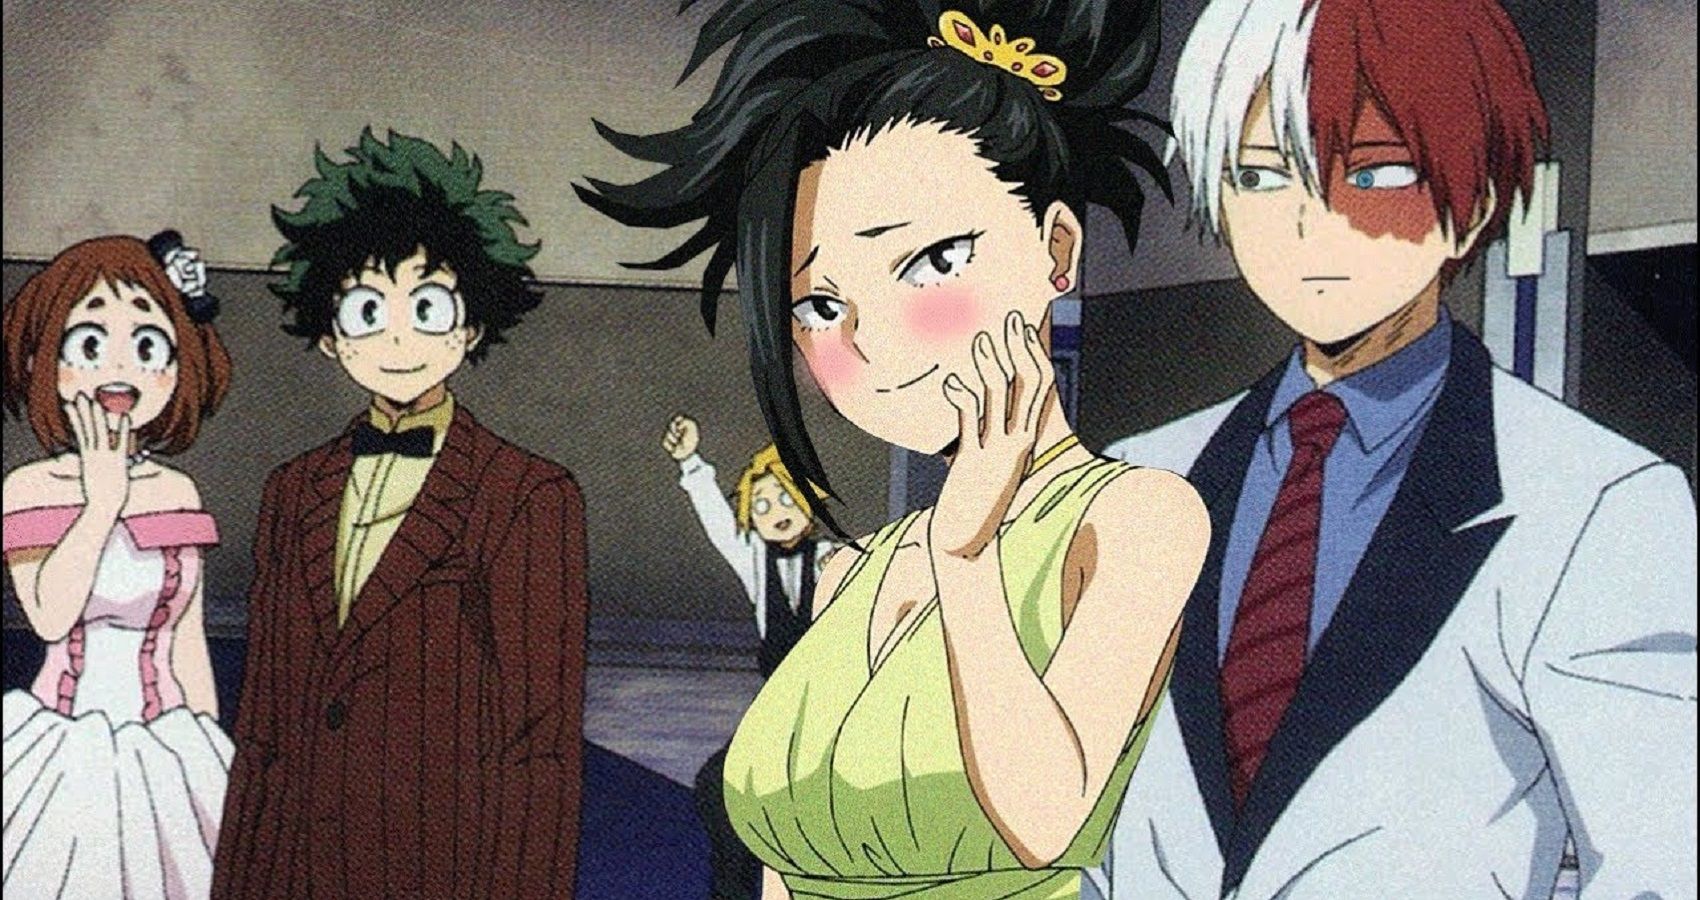 5 My Hero Academia Ships That The Fans Are Behind 5 They Rejected